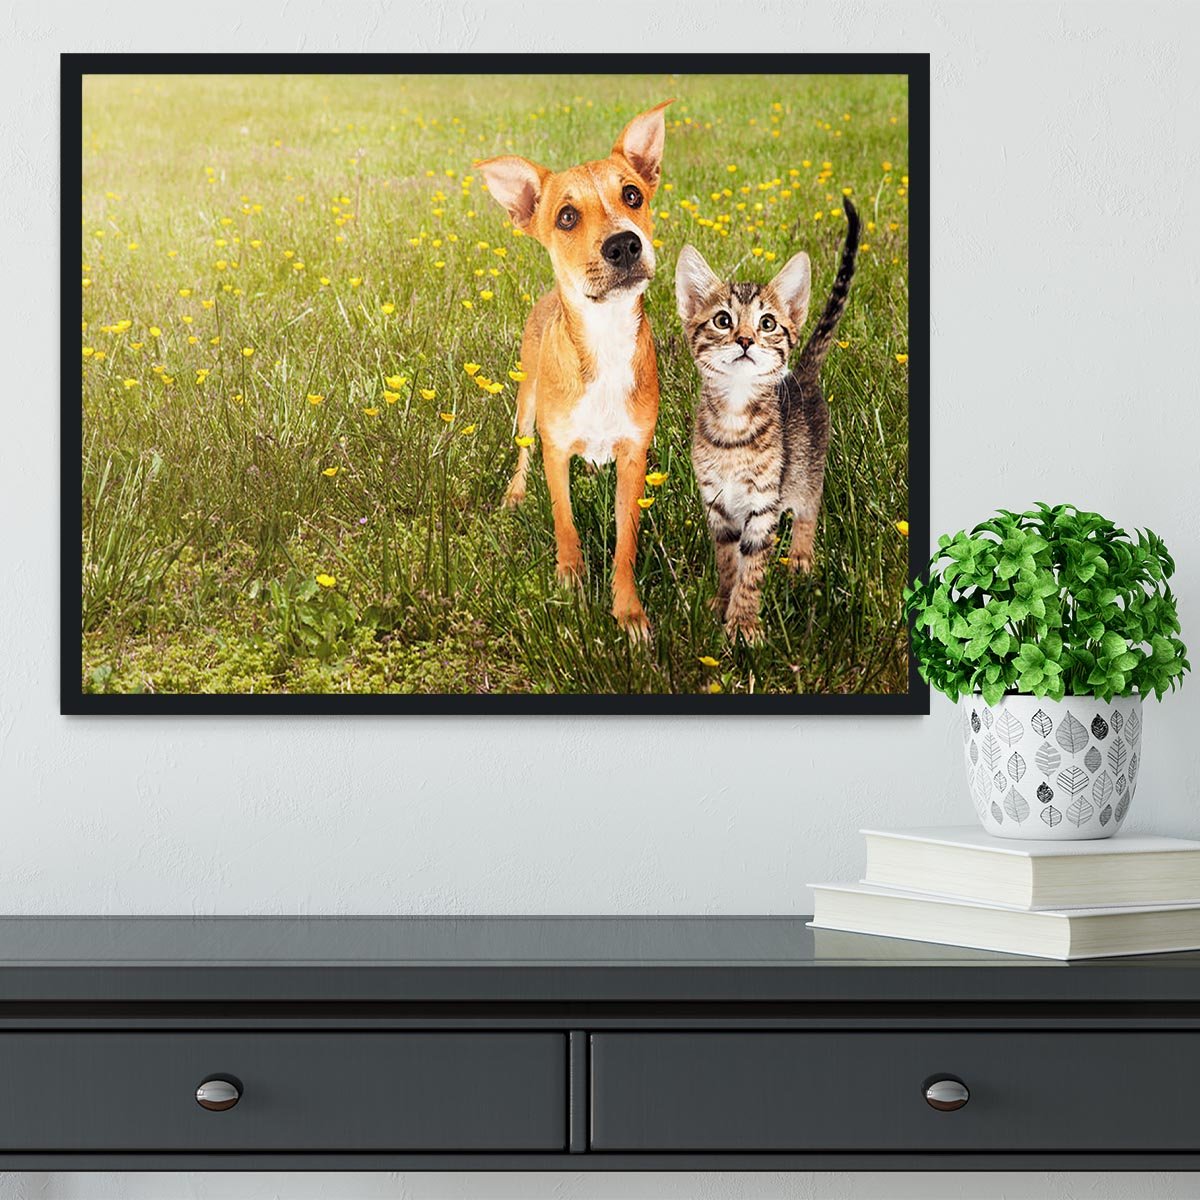 Cute kitten and puppy together in a field Framed Print - Canvas Art Rocks - 2